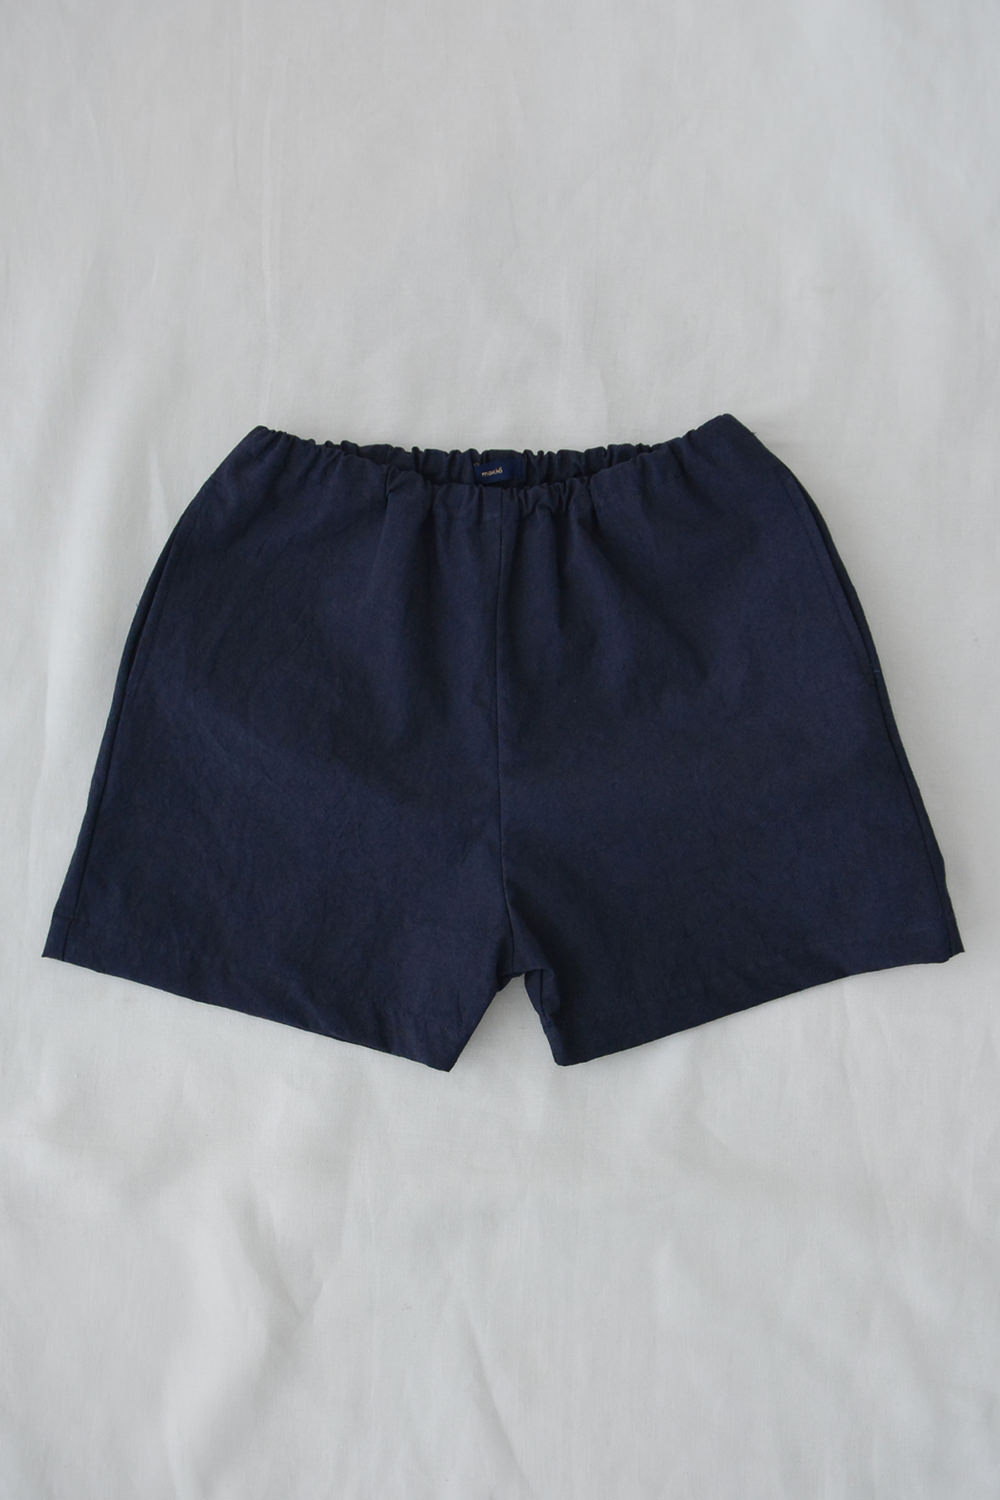 Kid's Summer Shorts - Navy Top Picture